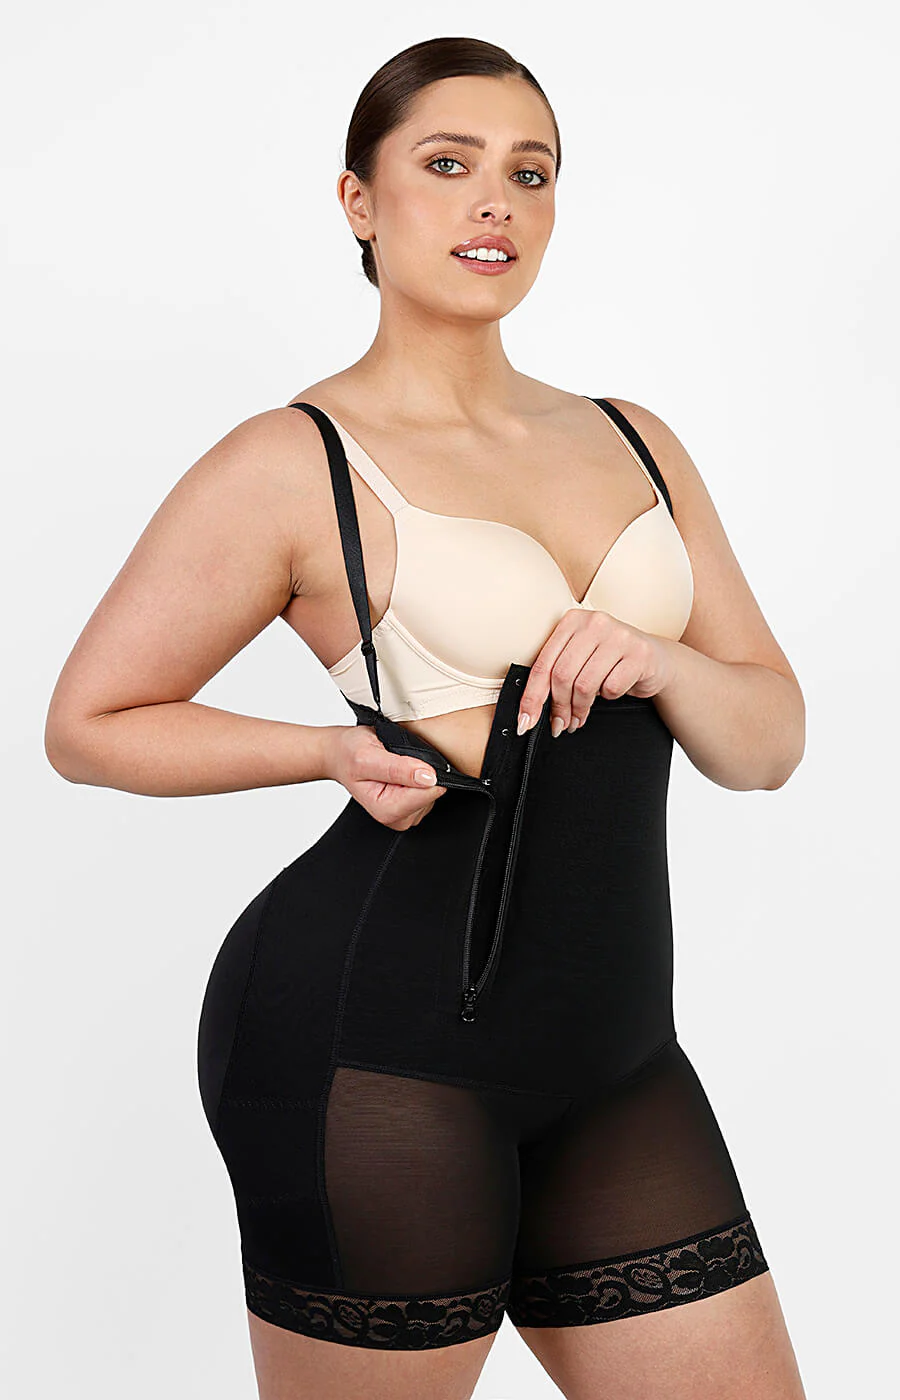 The best postpartum shapewear for every body type - Confessions Of